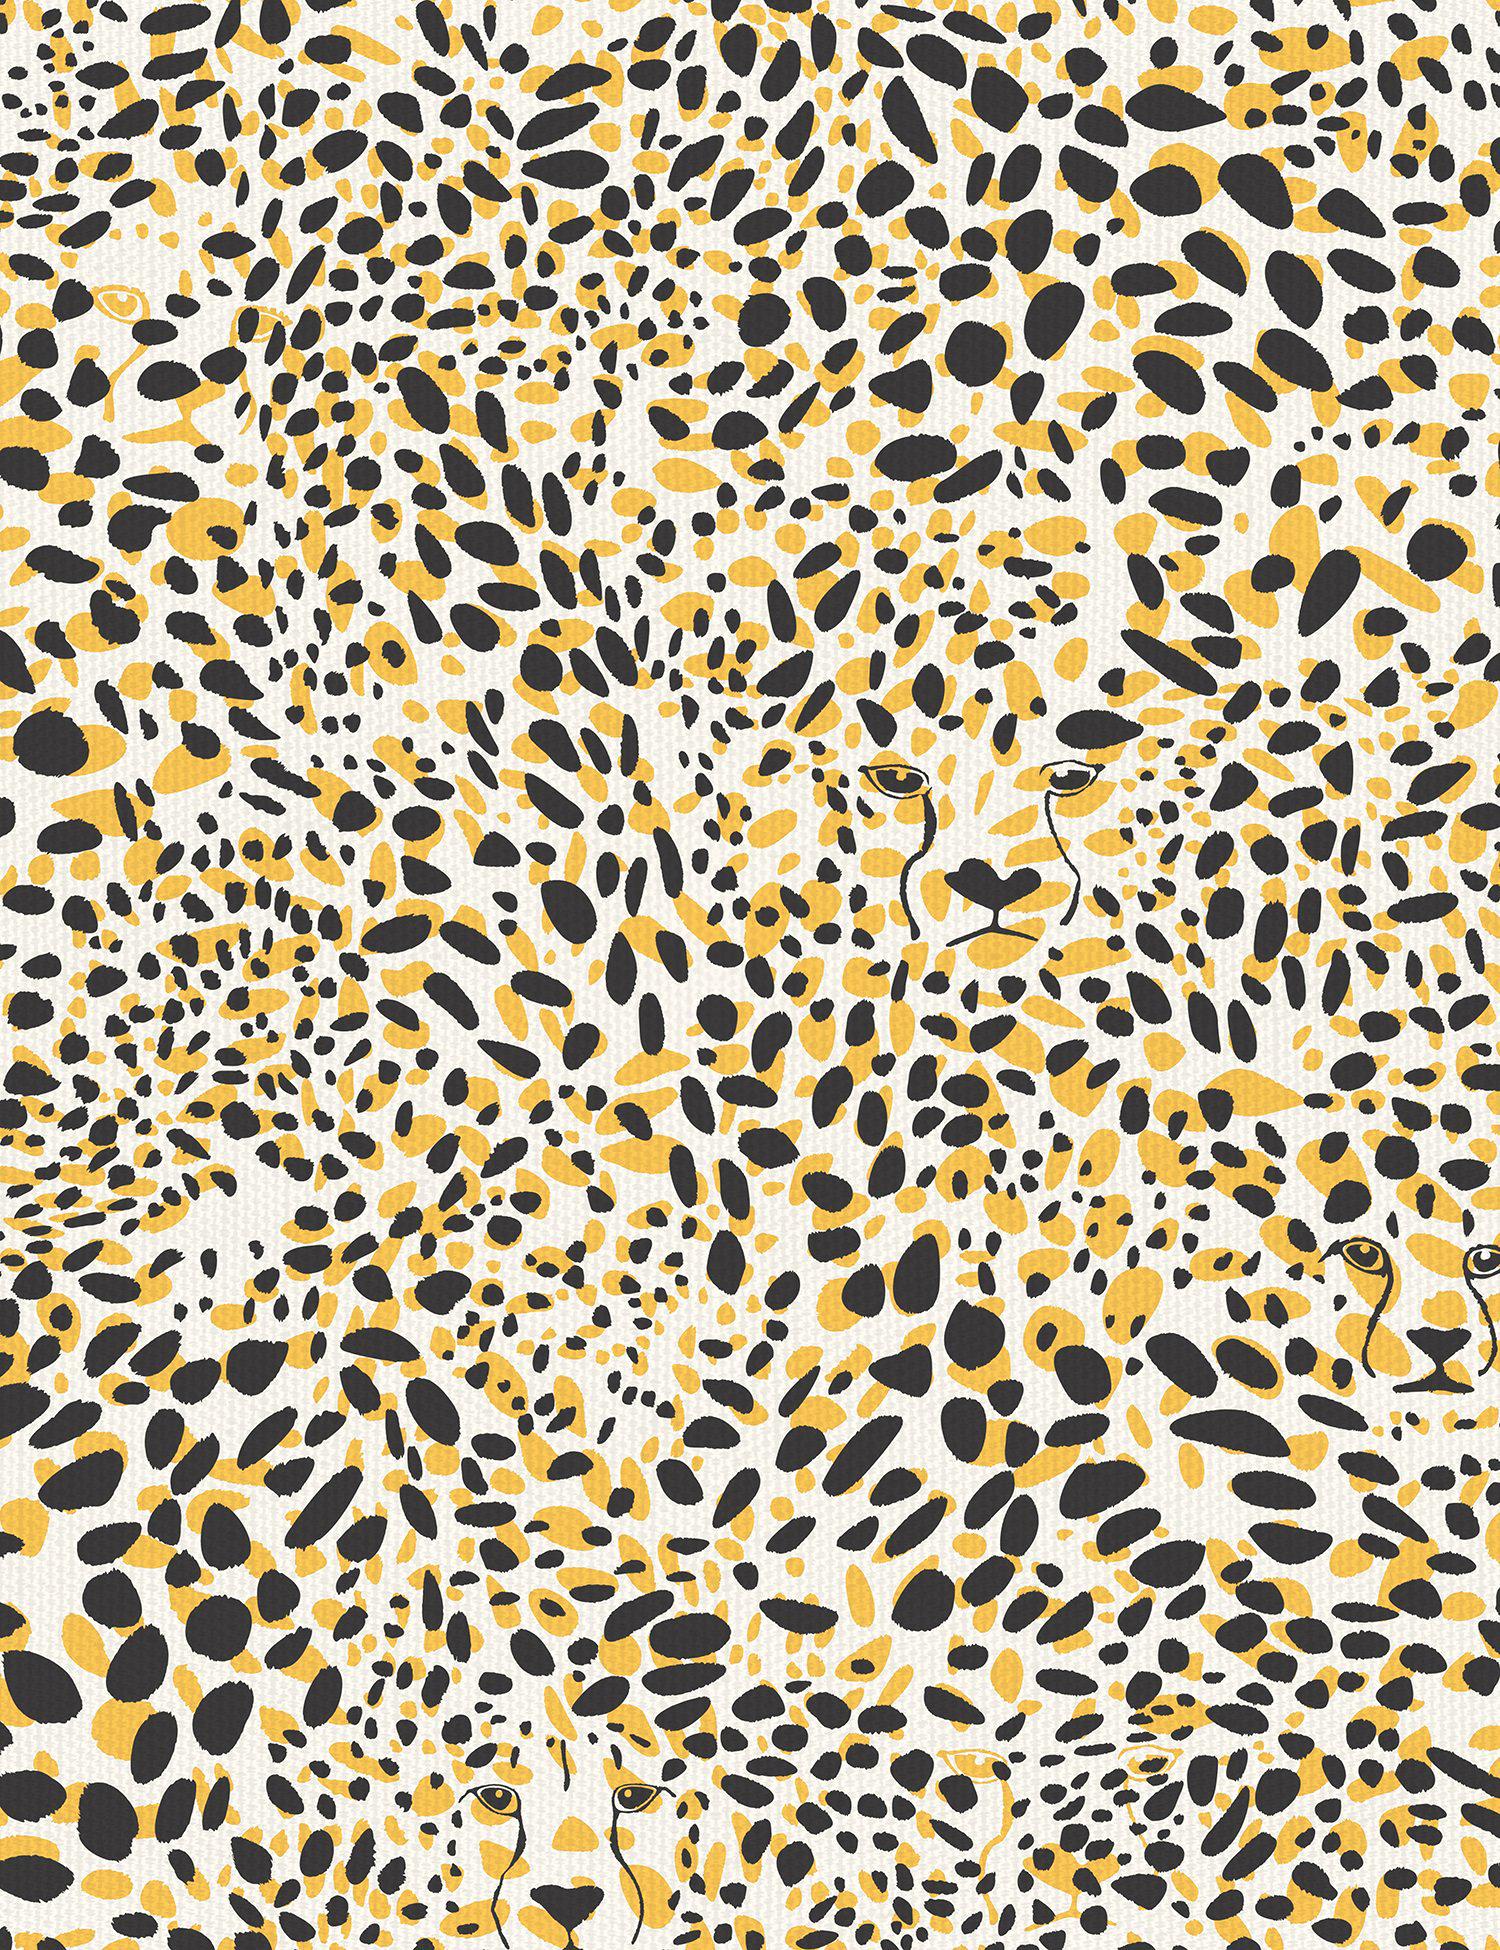 Contemporary Cheetah Vision Pillow in Aventura 'Golden Yellow, Black and Cream' For Sale